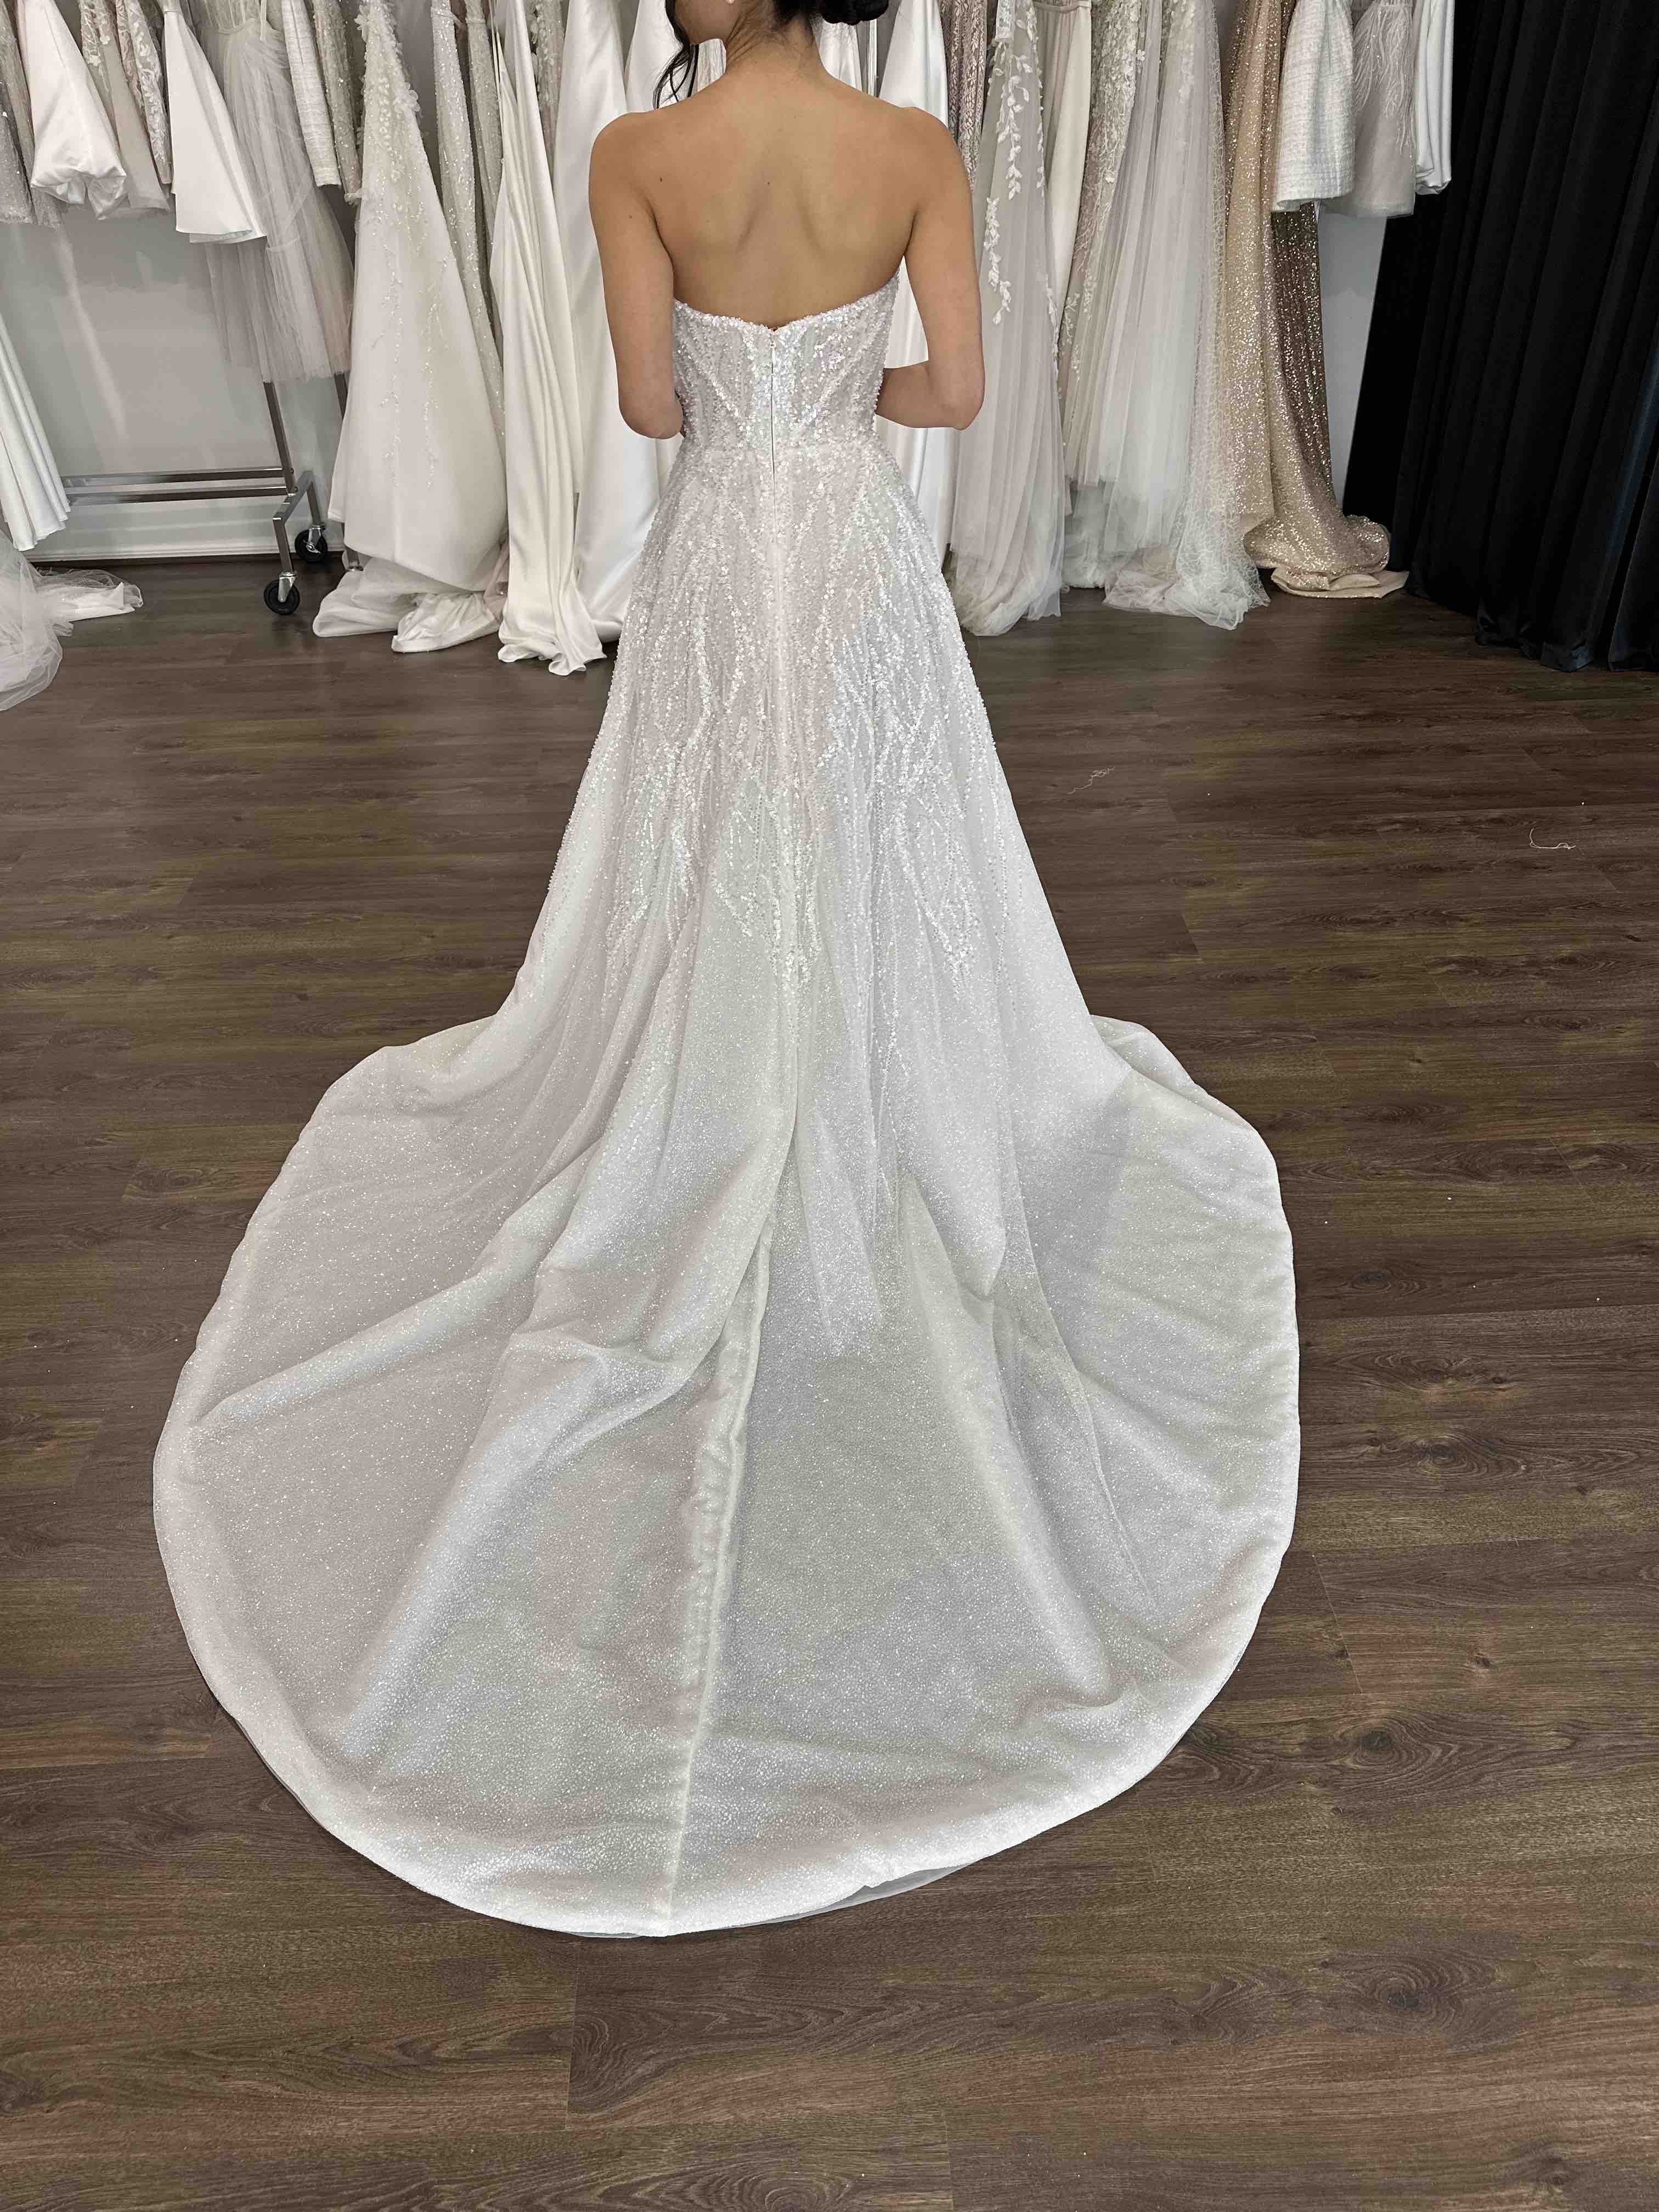 full skirt strapless wedding dress with long flowing dramatic train